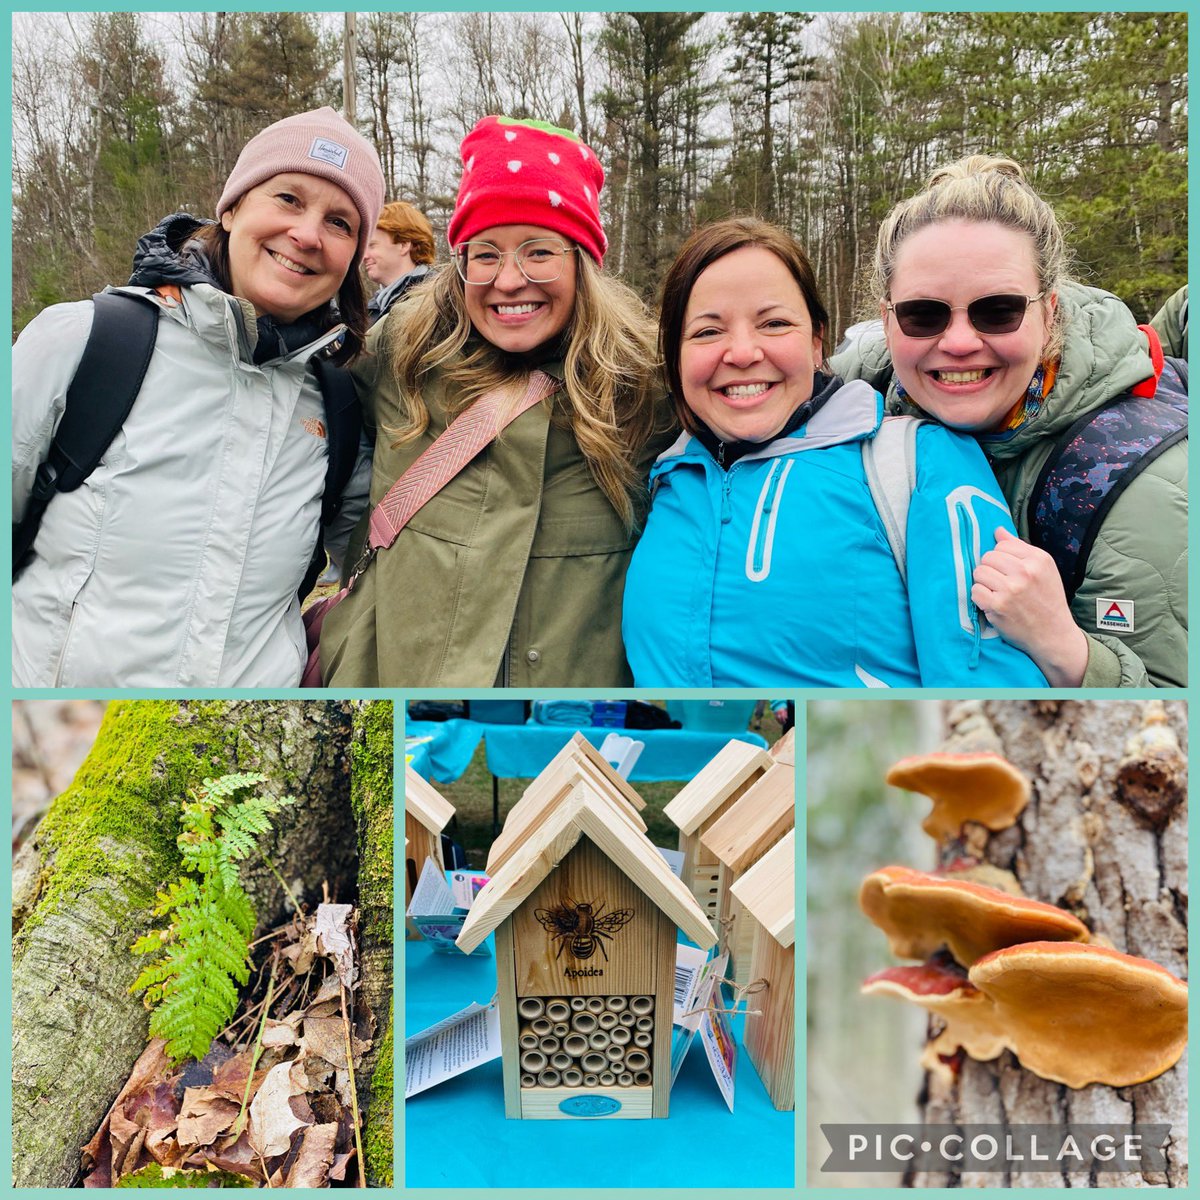 Always lovely to reconnect with former colleagues at the Spring into the Outdoors Conference! @MrsChampigny @ms_bedard @StJeromeMmeV @ocsbEco #ocsbOutdoors #ocsbBeCommunity #ocsbForest #ocsbEarth @OCDSBoec